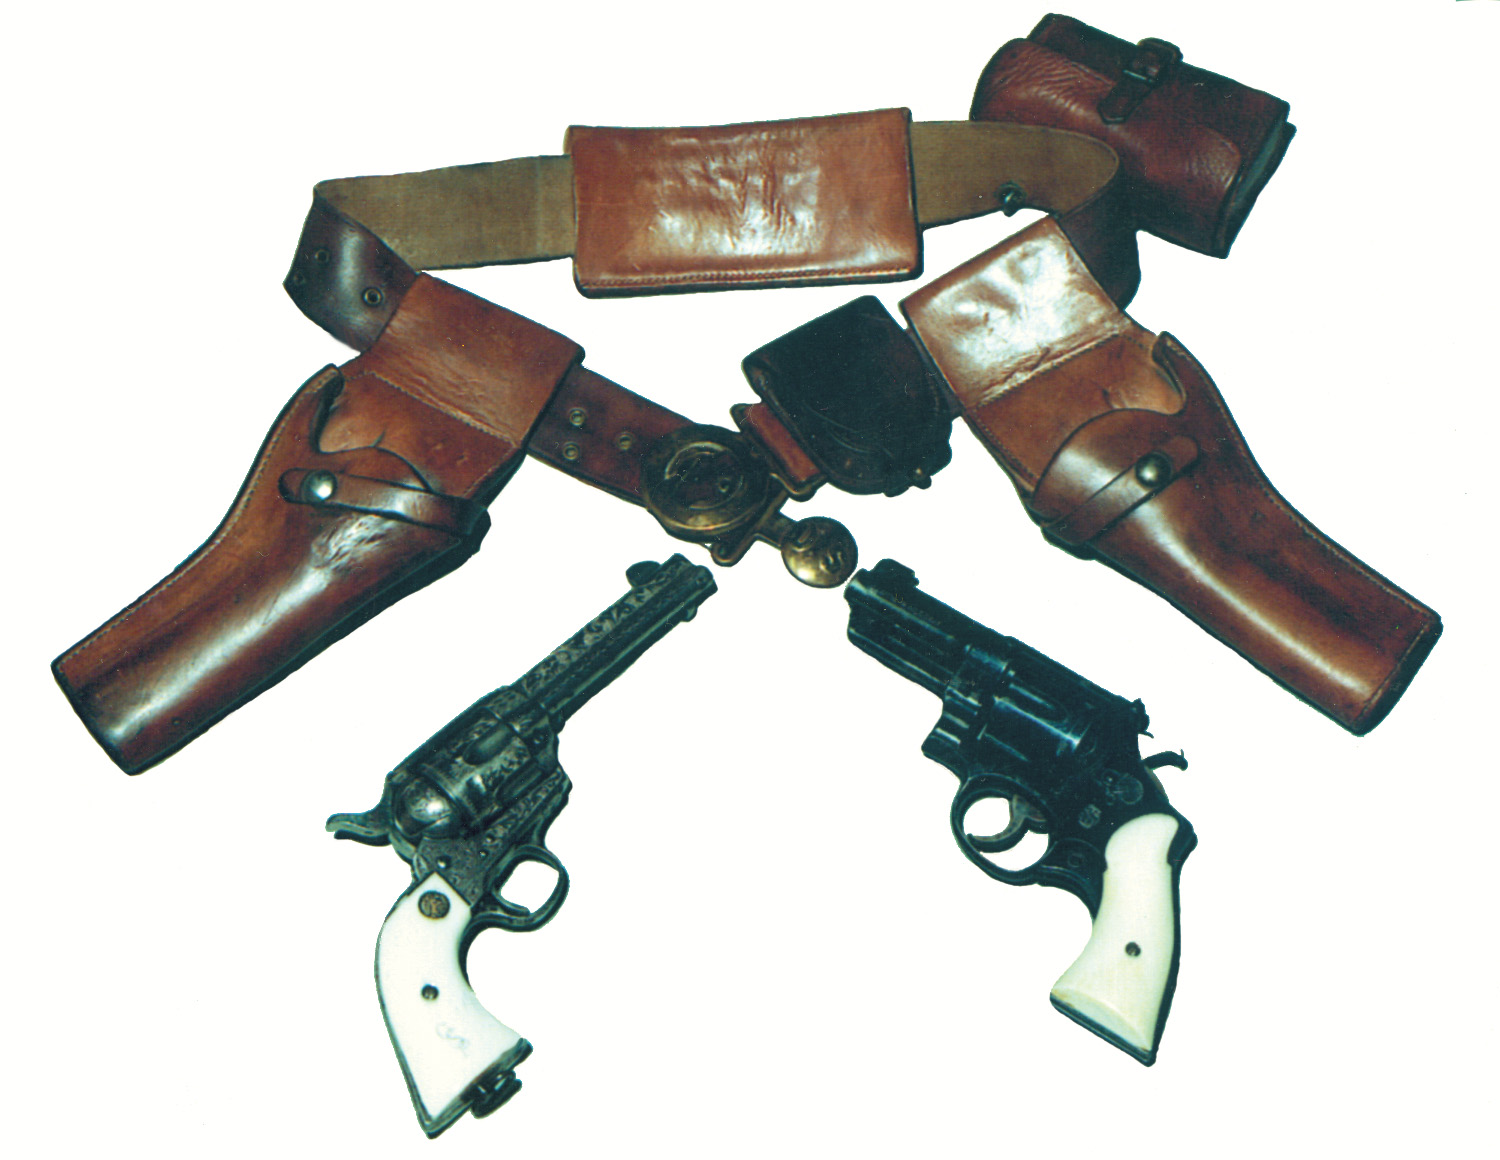 Patton’s pistols: On the left is the Colt .45 and on the right the Smith & Wesson .357 Magnum.